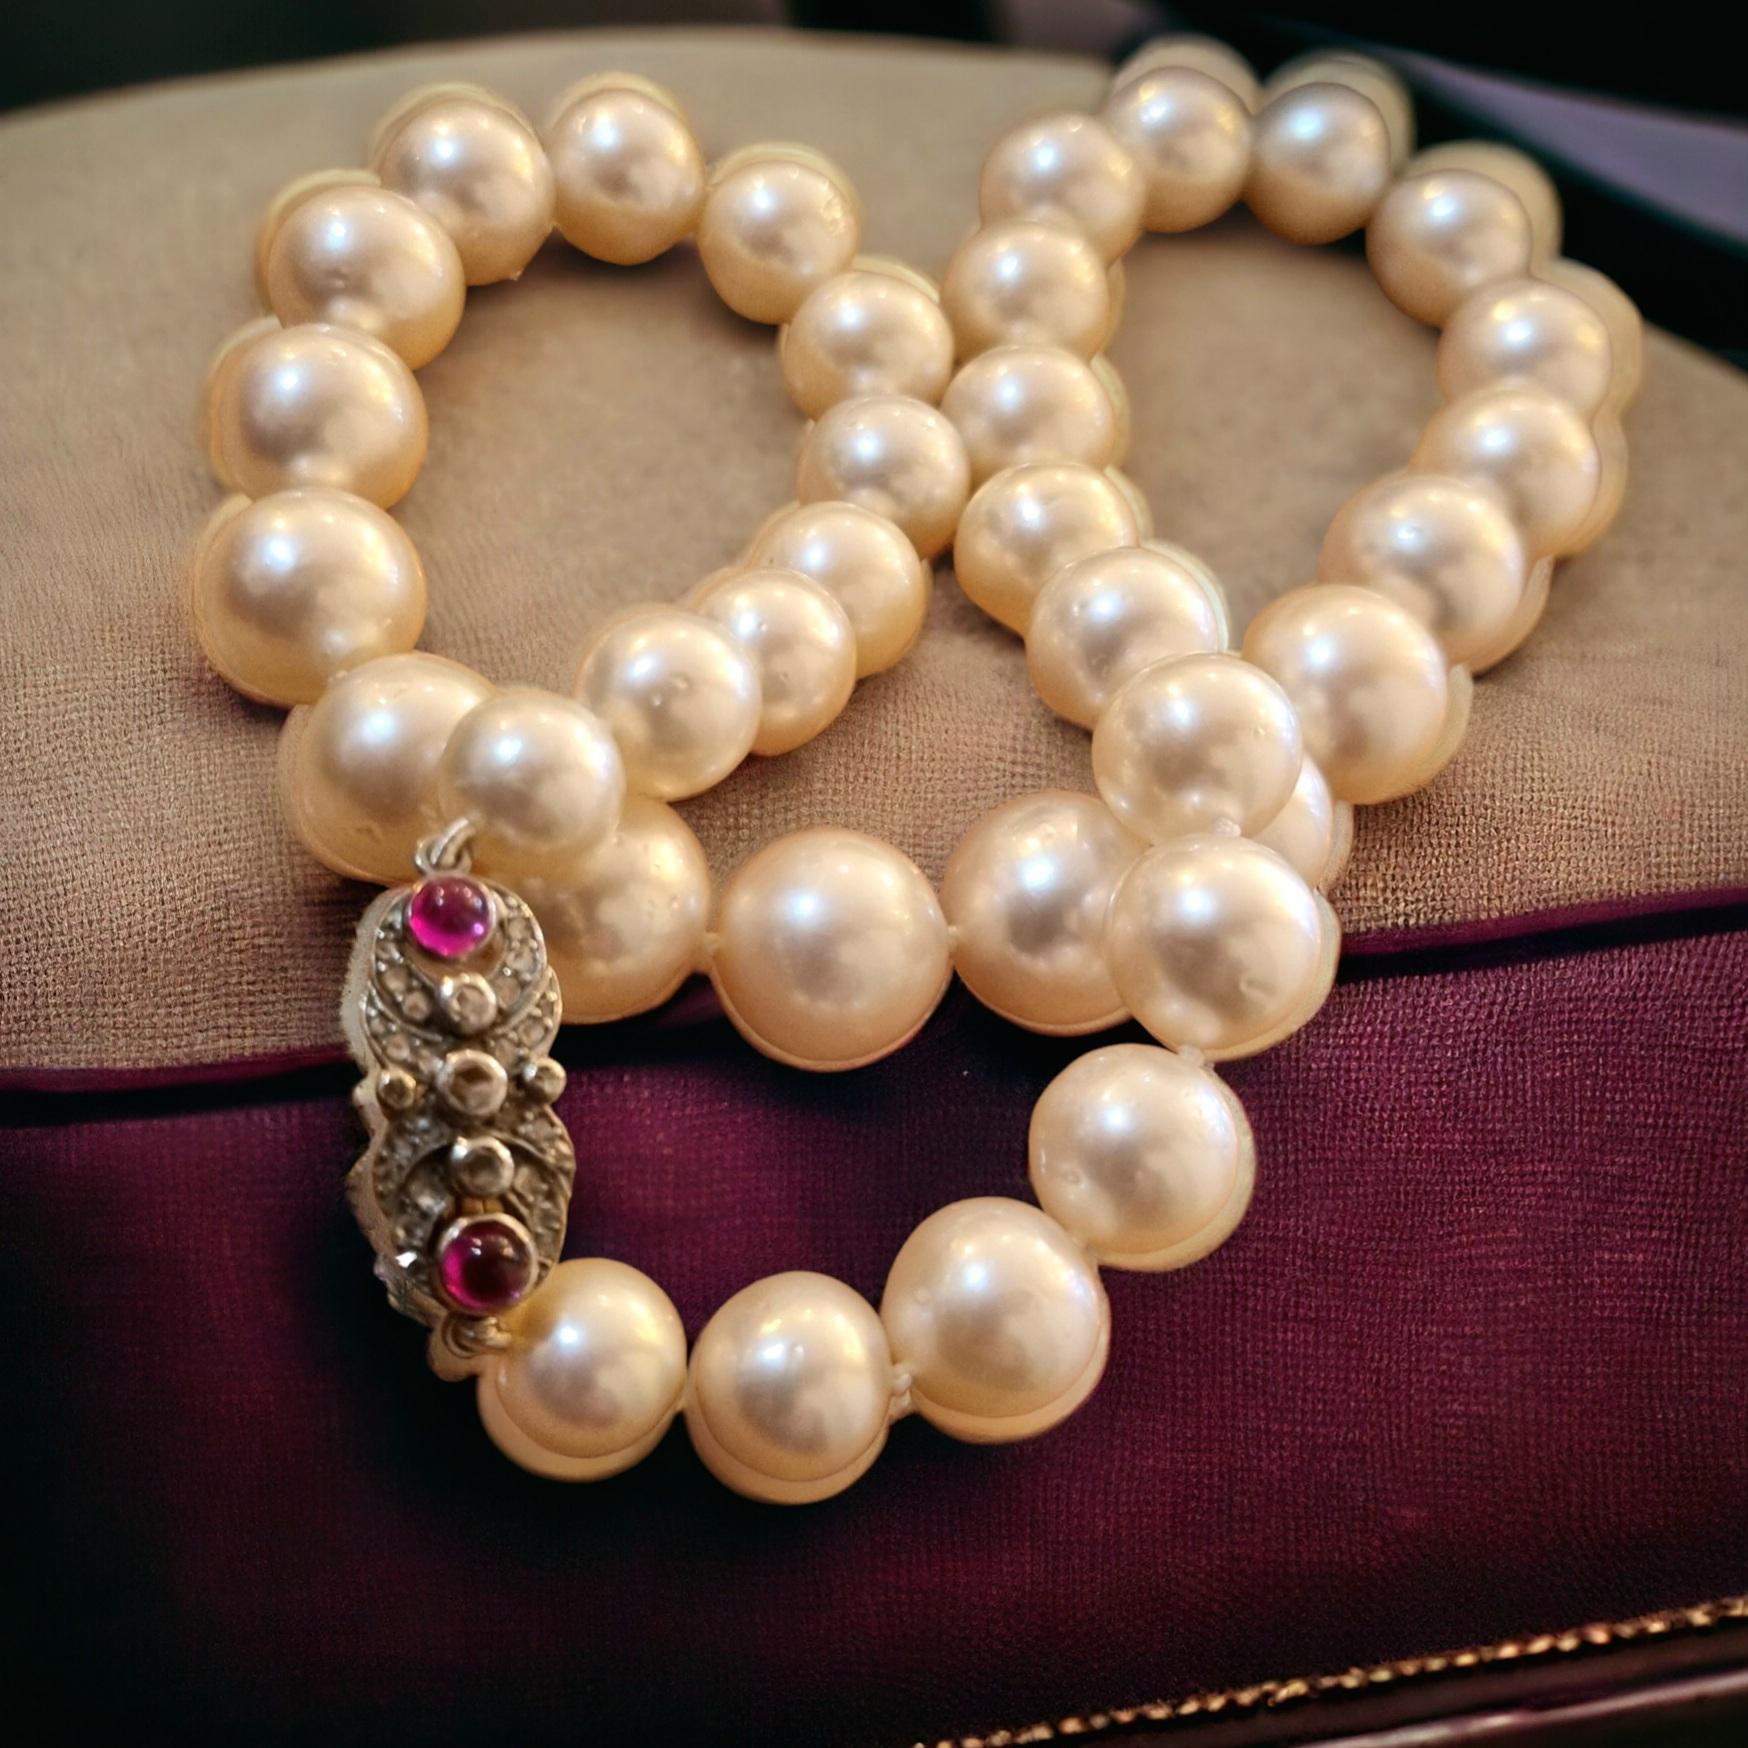 Graduated South Sea Pearl Necklace. Thirty-five high luster, white south sea pearls with shimmering overtones of silver and rose, compose this 19 -1/2 inch knotted necklace. The pearls  round shaped and well matched,  graduate from approximately 10